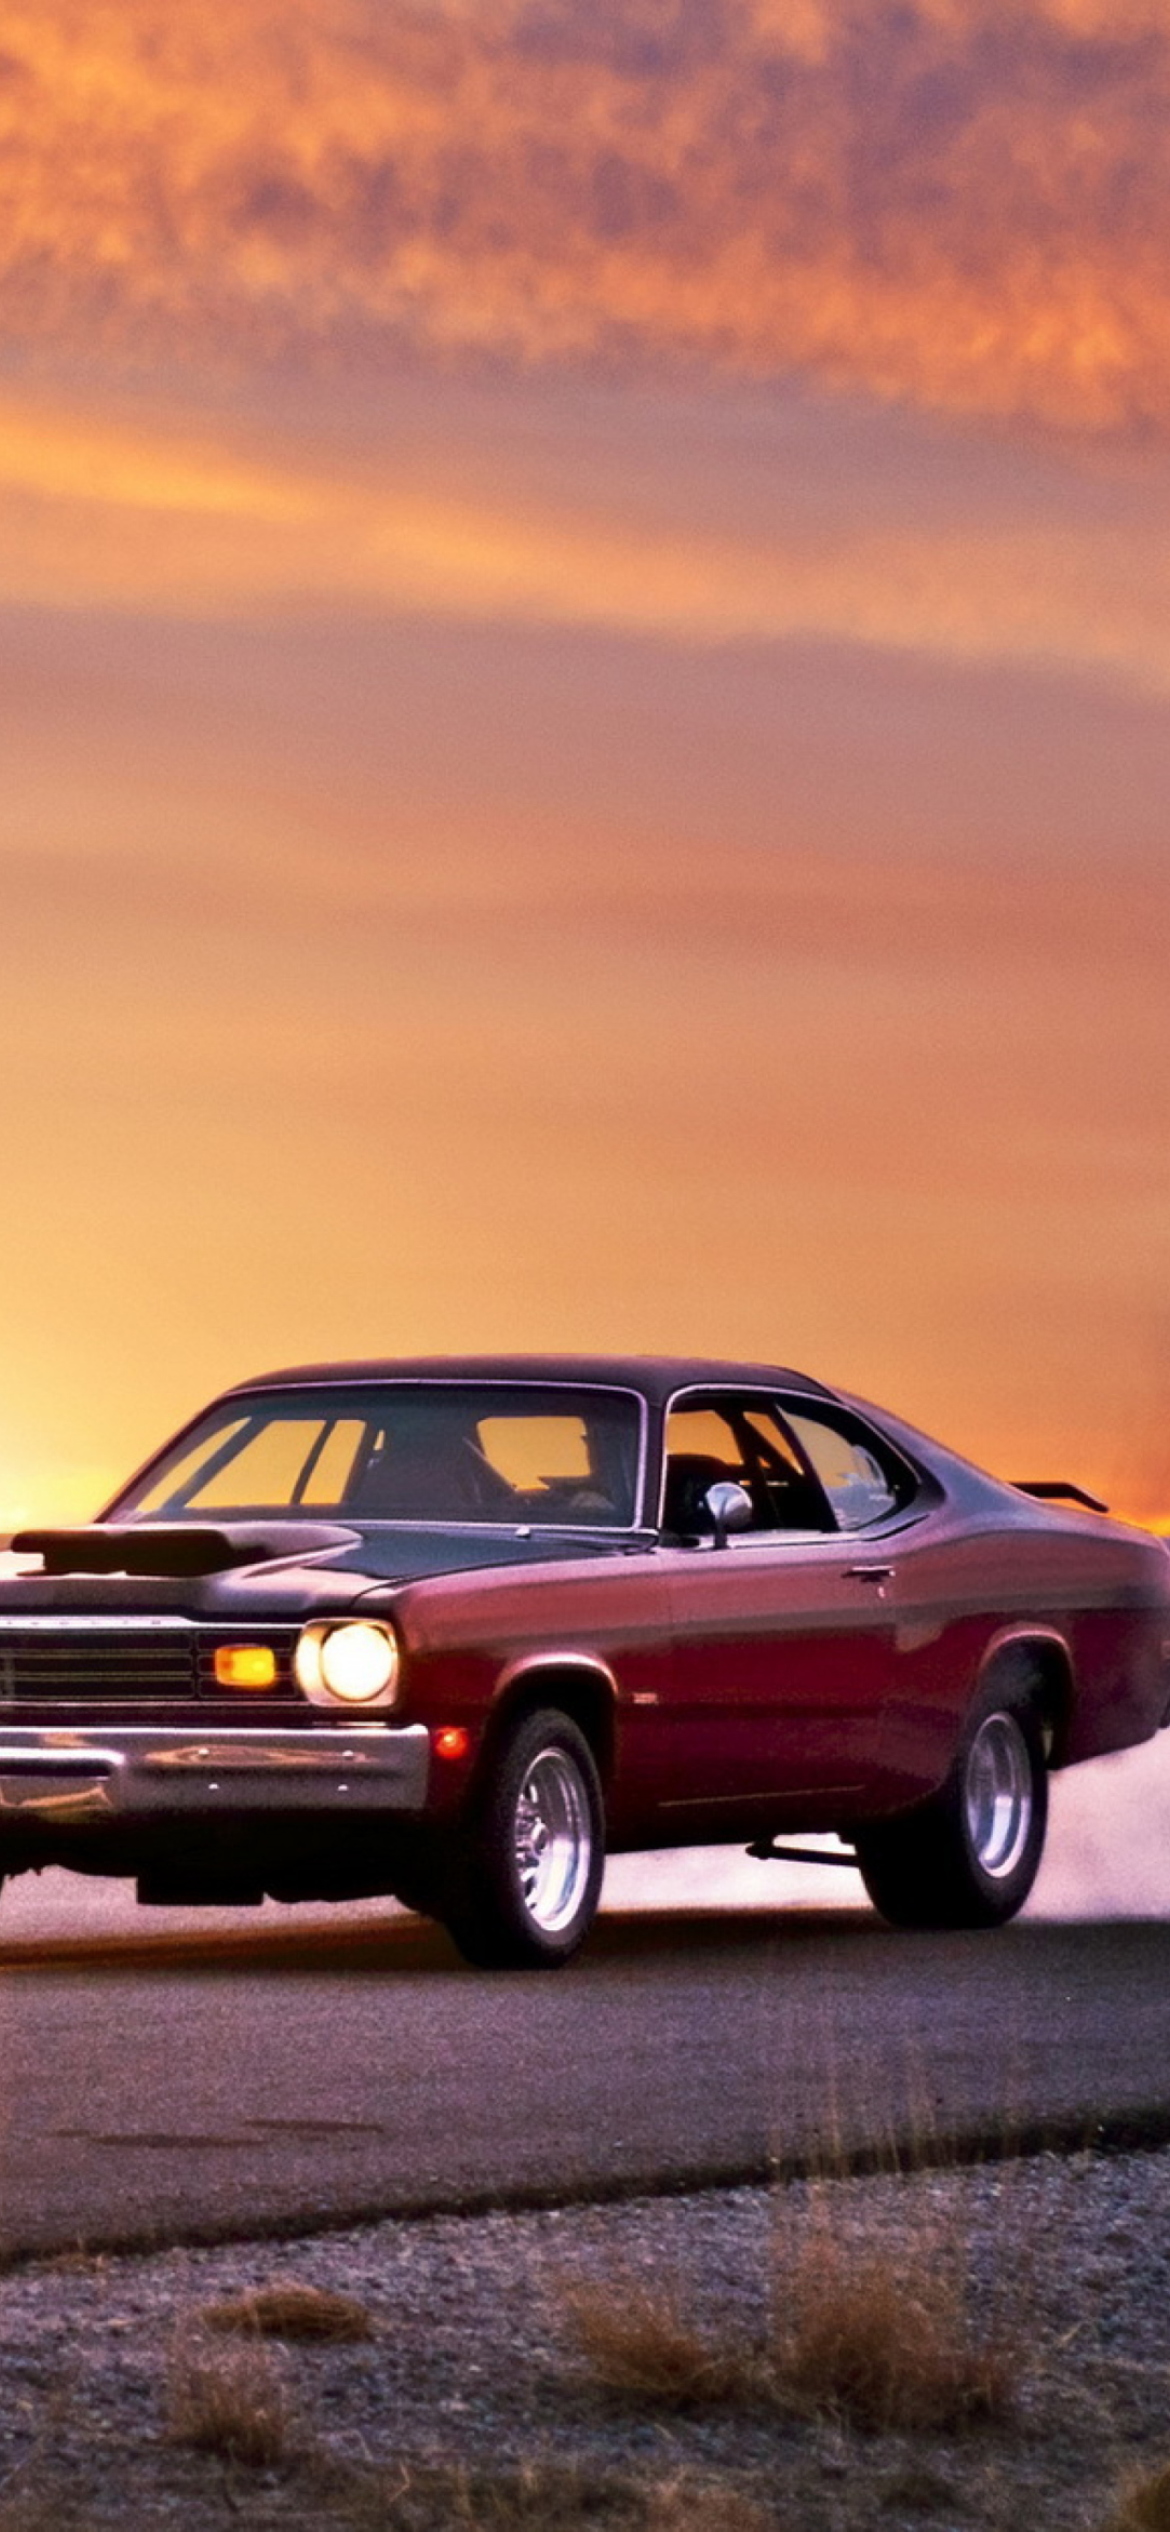 Plymouth Duster wallpaper 1170x2532